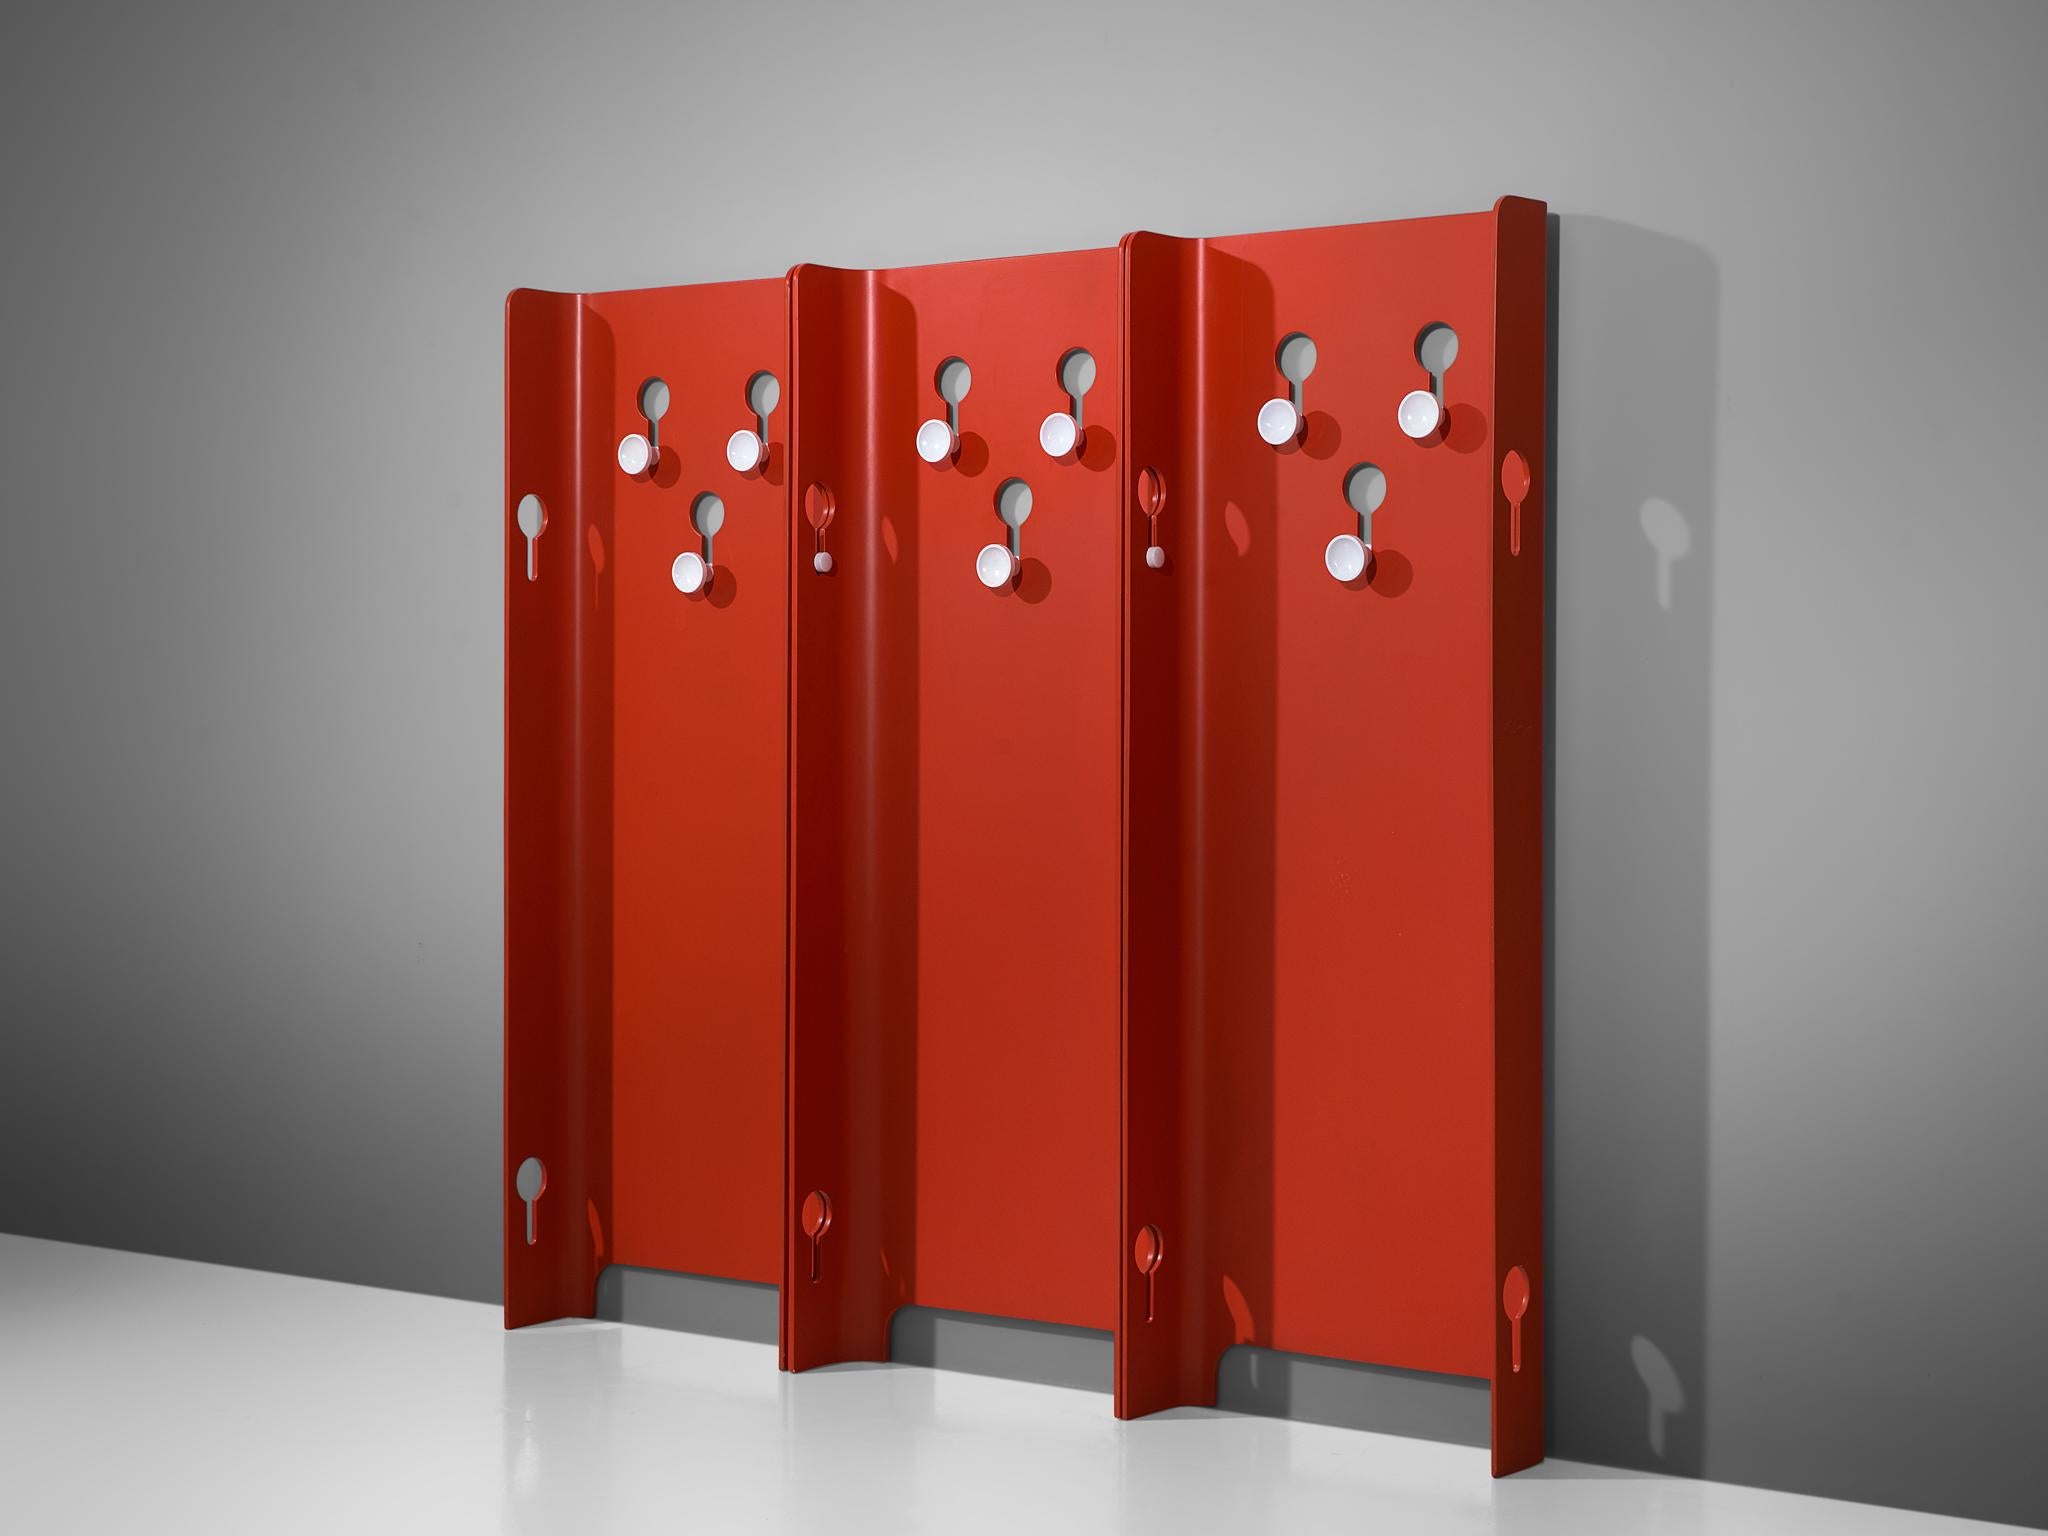 Set of three red hall stands by Carlo de Carli for Fiarm, 1960s

Set of red lacquered coat racks, designed by Carlo de Carli for Fiarm in the 1960s. Each hall Stand is executed with white knobs to hang your garments and accessories. The knops can